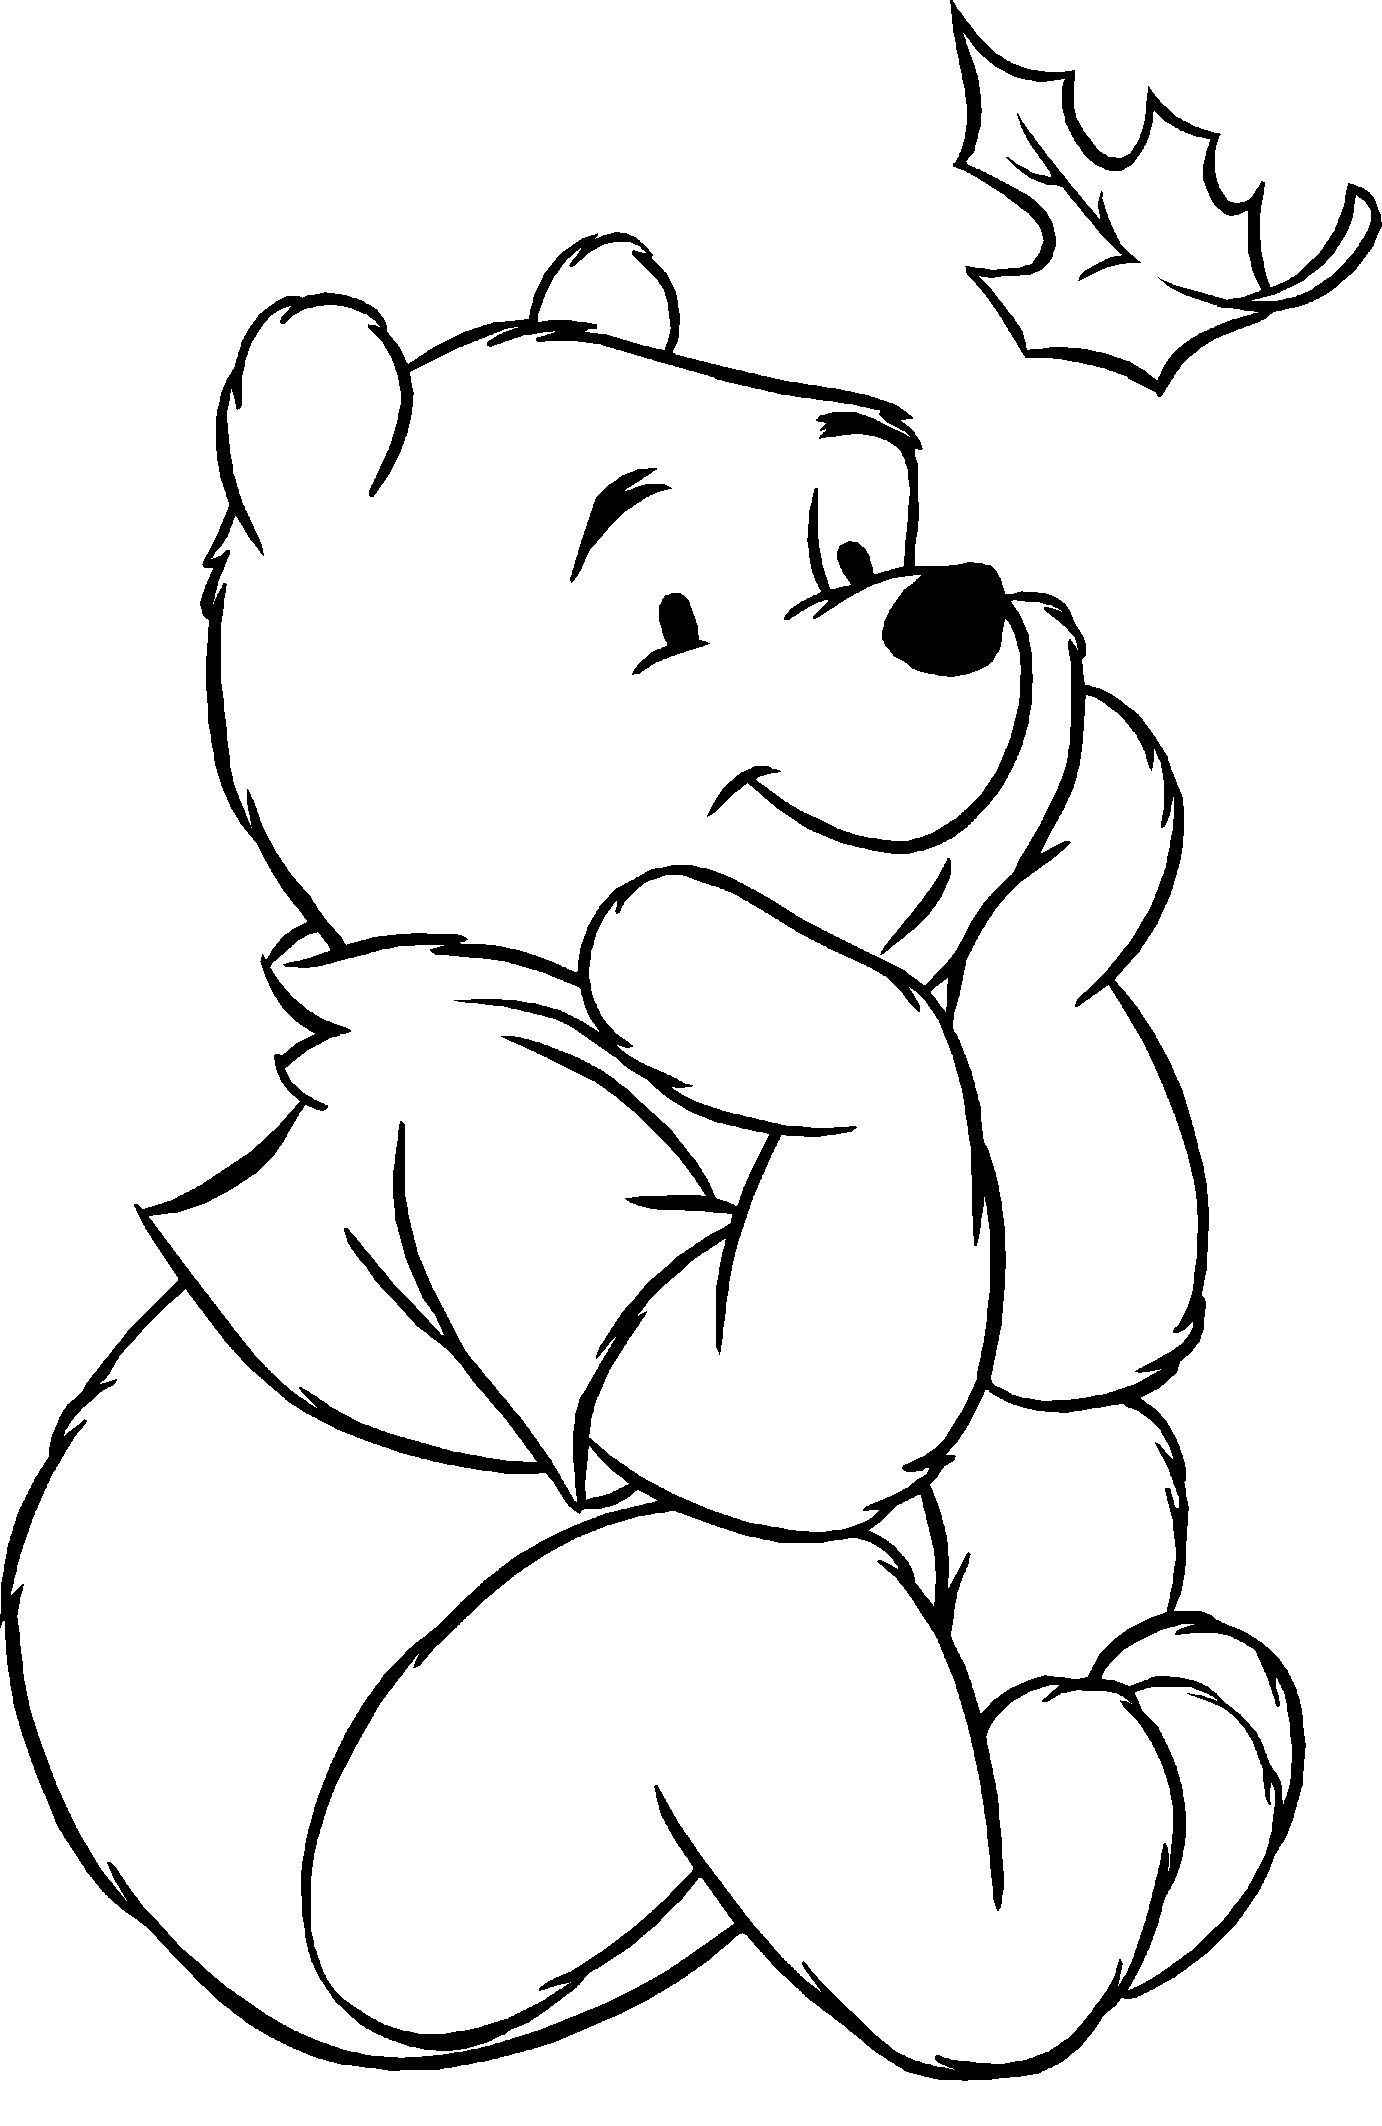 Pooh Bear coloring pages, Cartoon coloring pages, Bear ... - SheetalColor.com